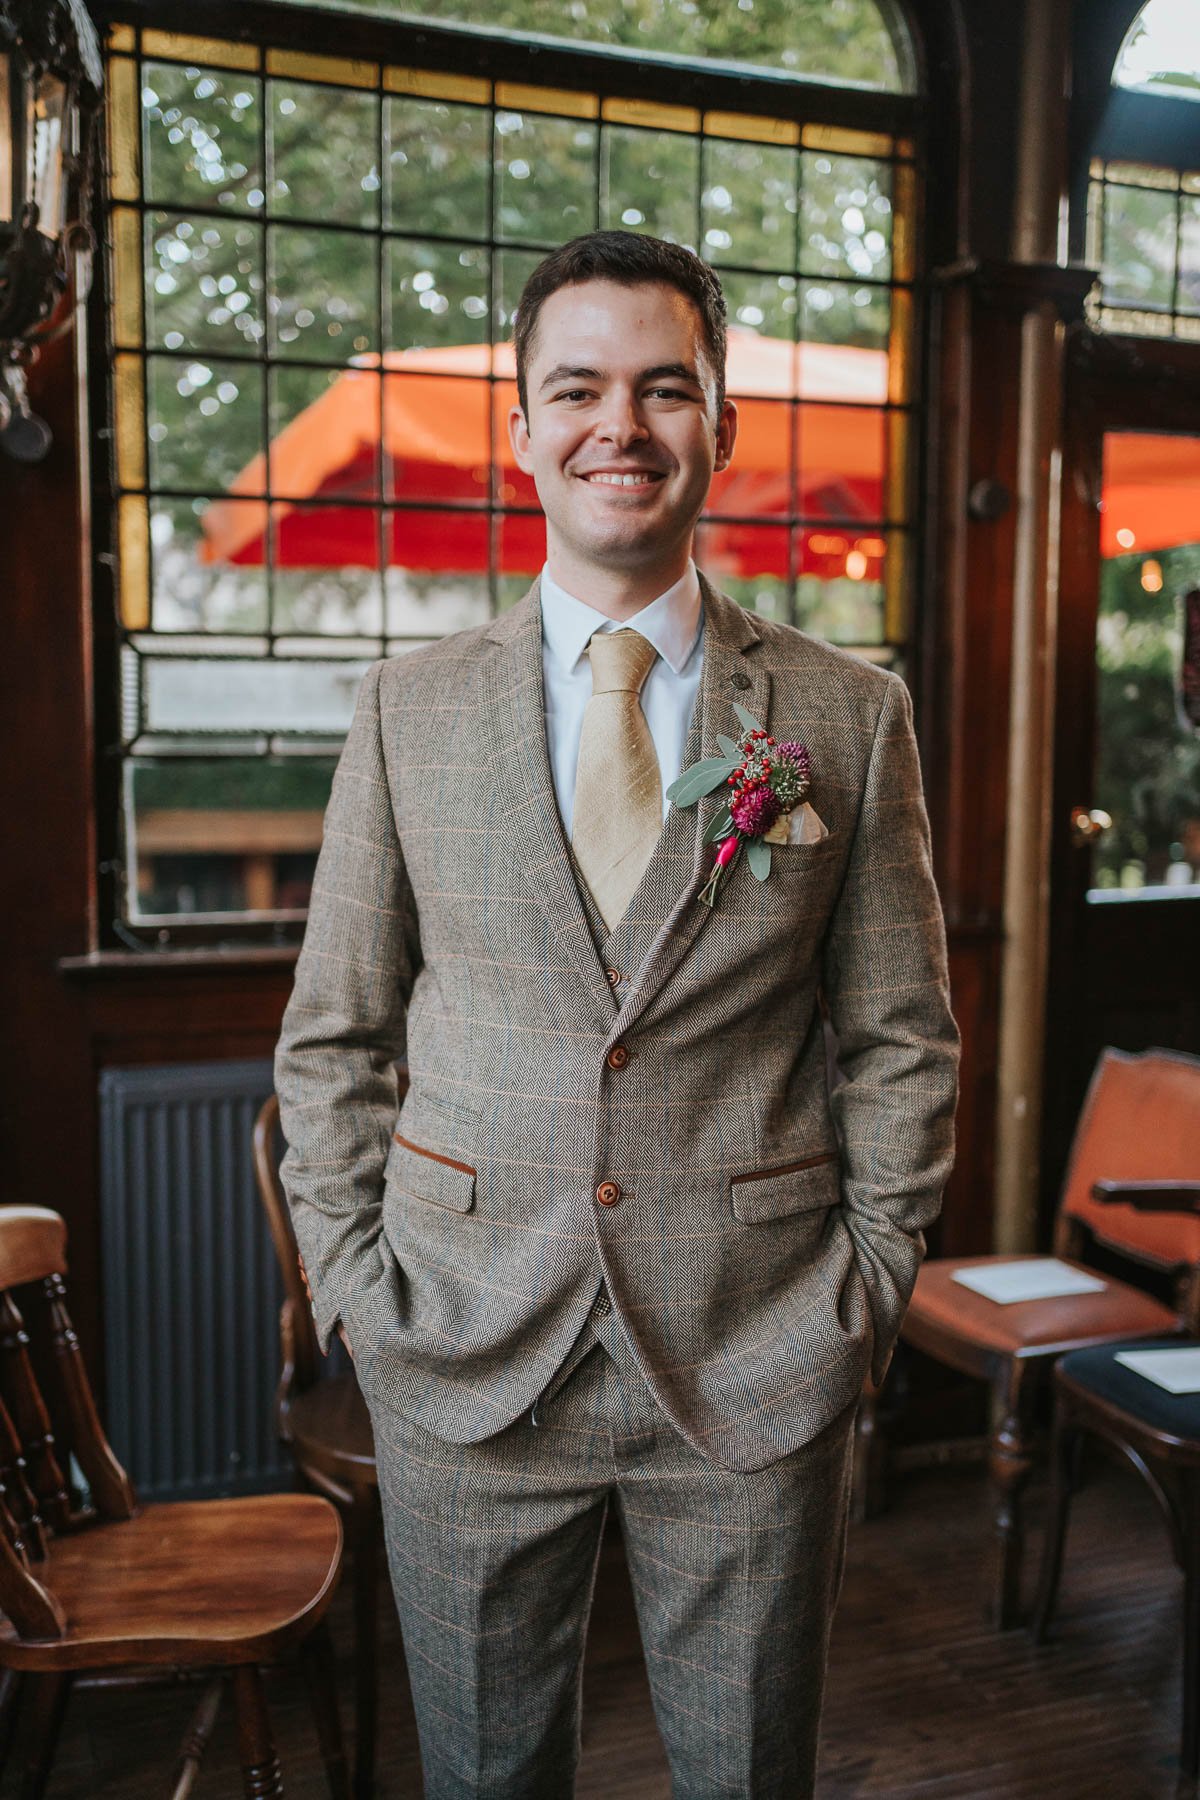  The groom all dressed up inside the prince albert pub in camden. 